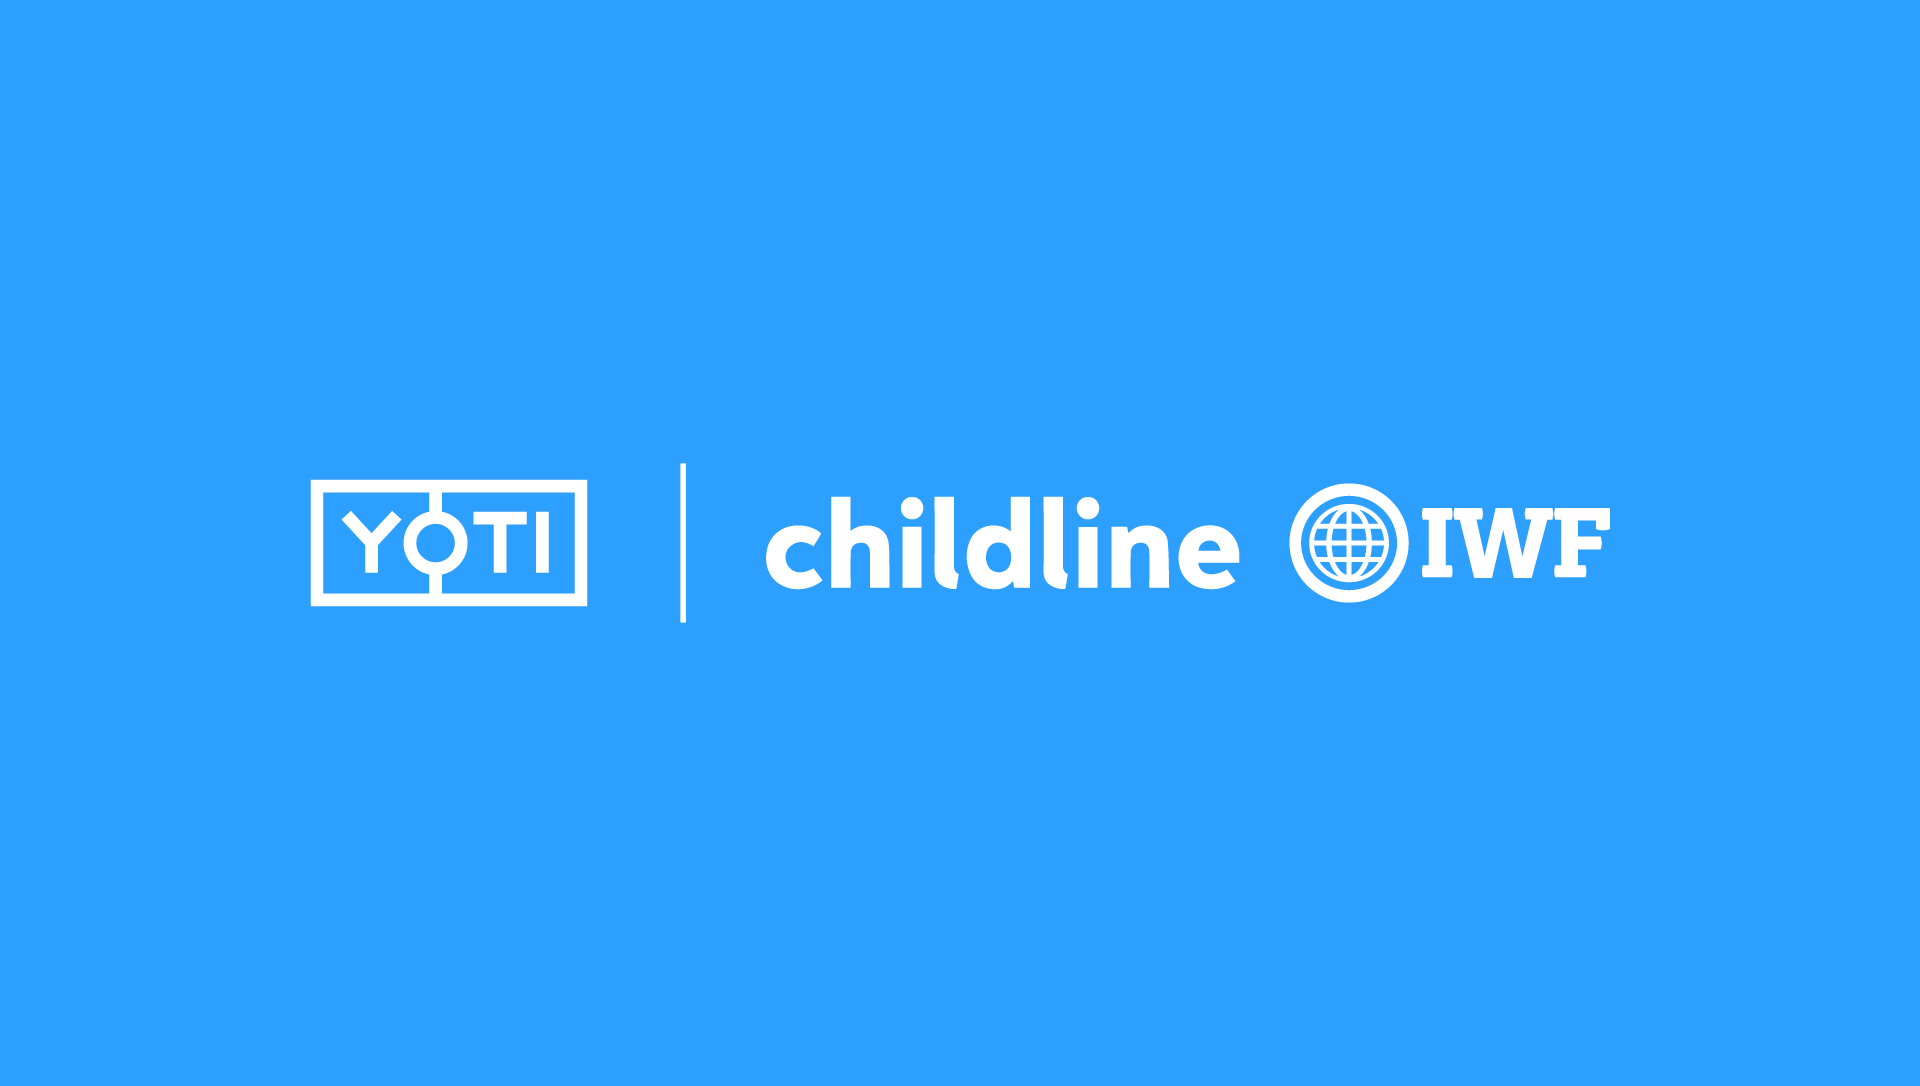 Yoti delivers age verification for Childline and the IWF ‘Report Remove’ tool that helps young people remove nude images and videos shared online